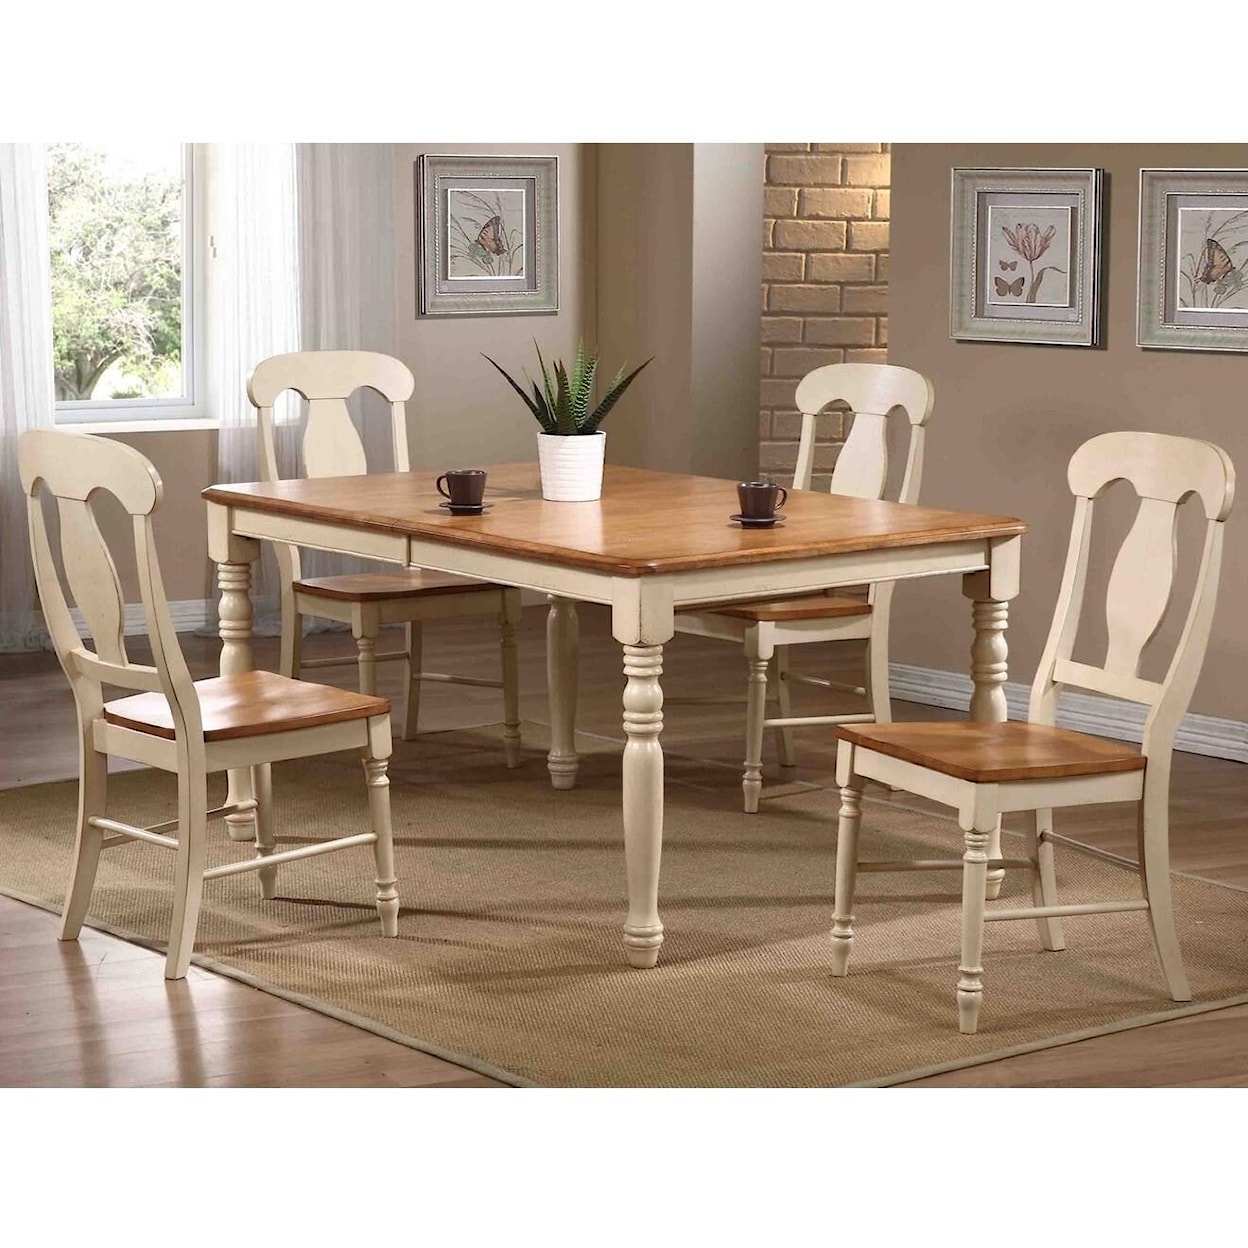 Iconic Furniture Co. Caramel Biscotti 5 Piece Dining Set with Splat Back Chairs